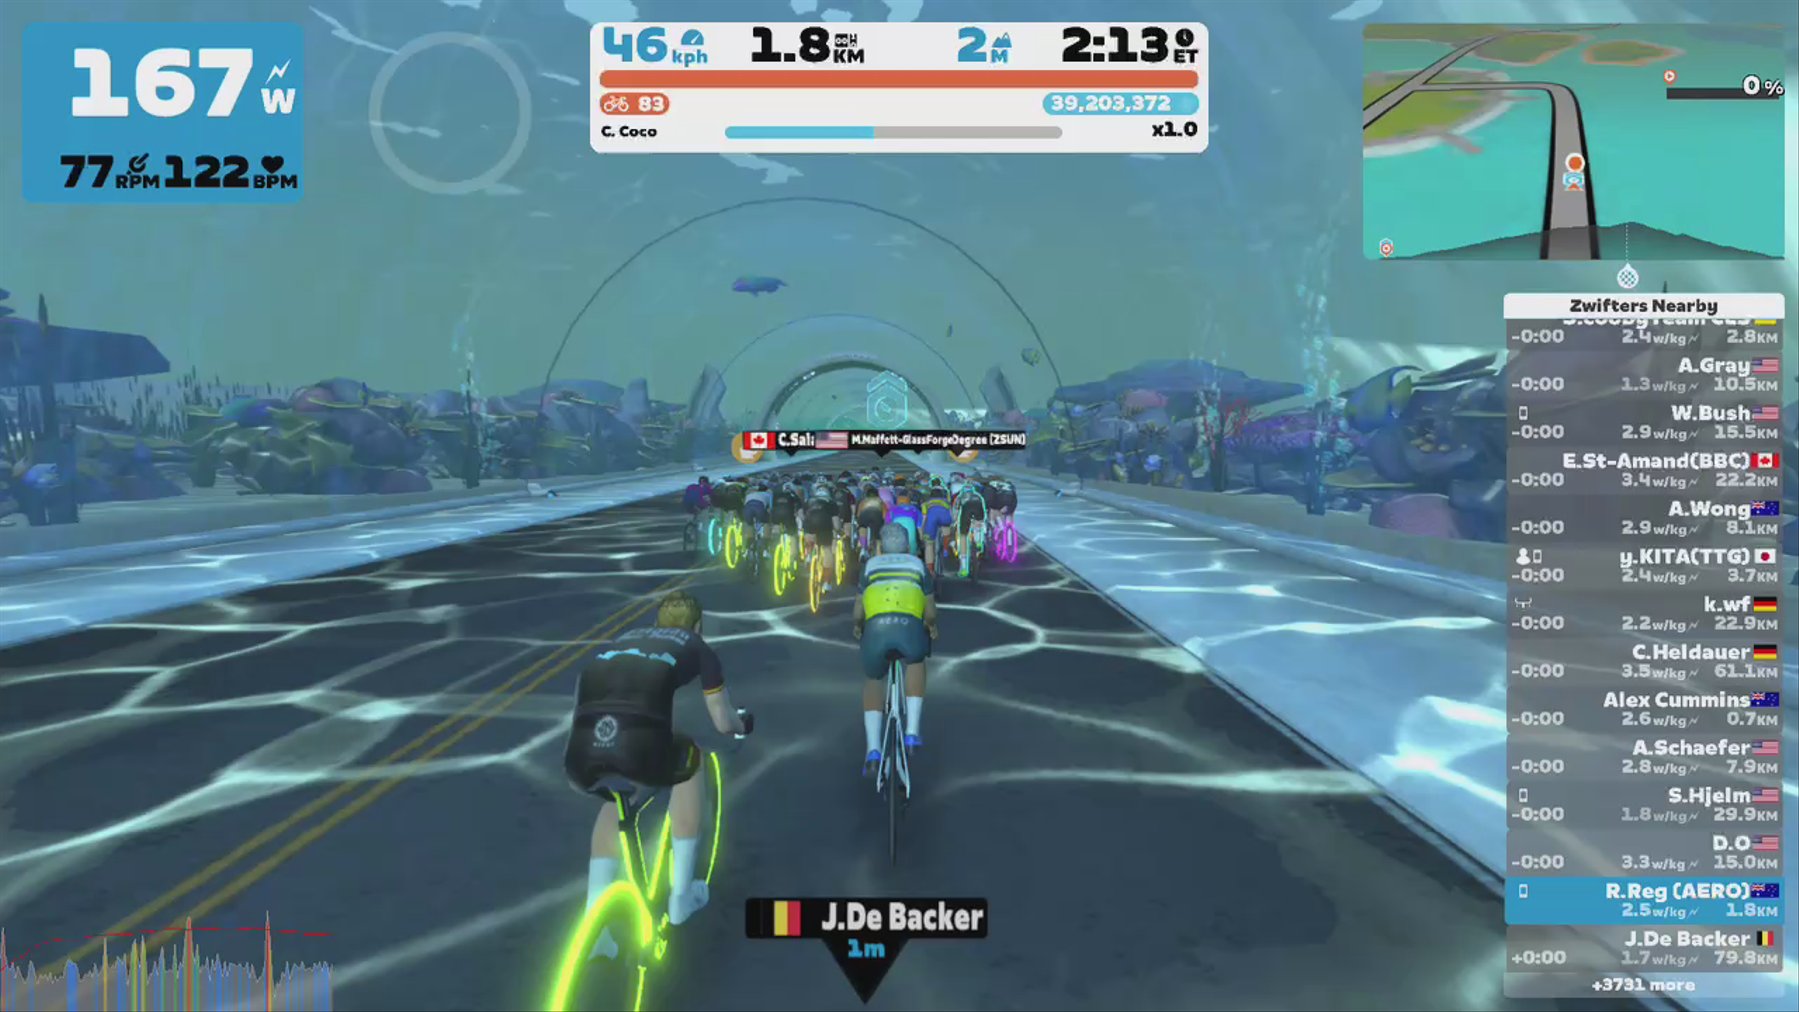 Zwift - Pacer Group Ride: Tick Tock in Watopia with Coco